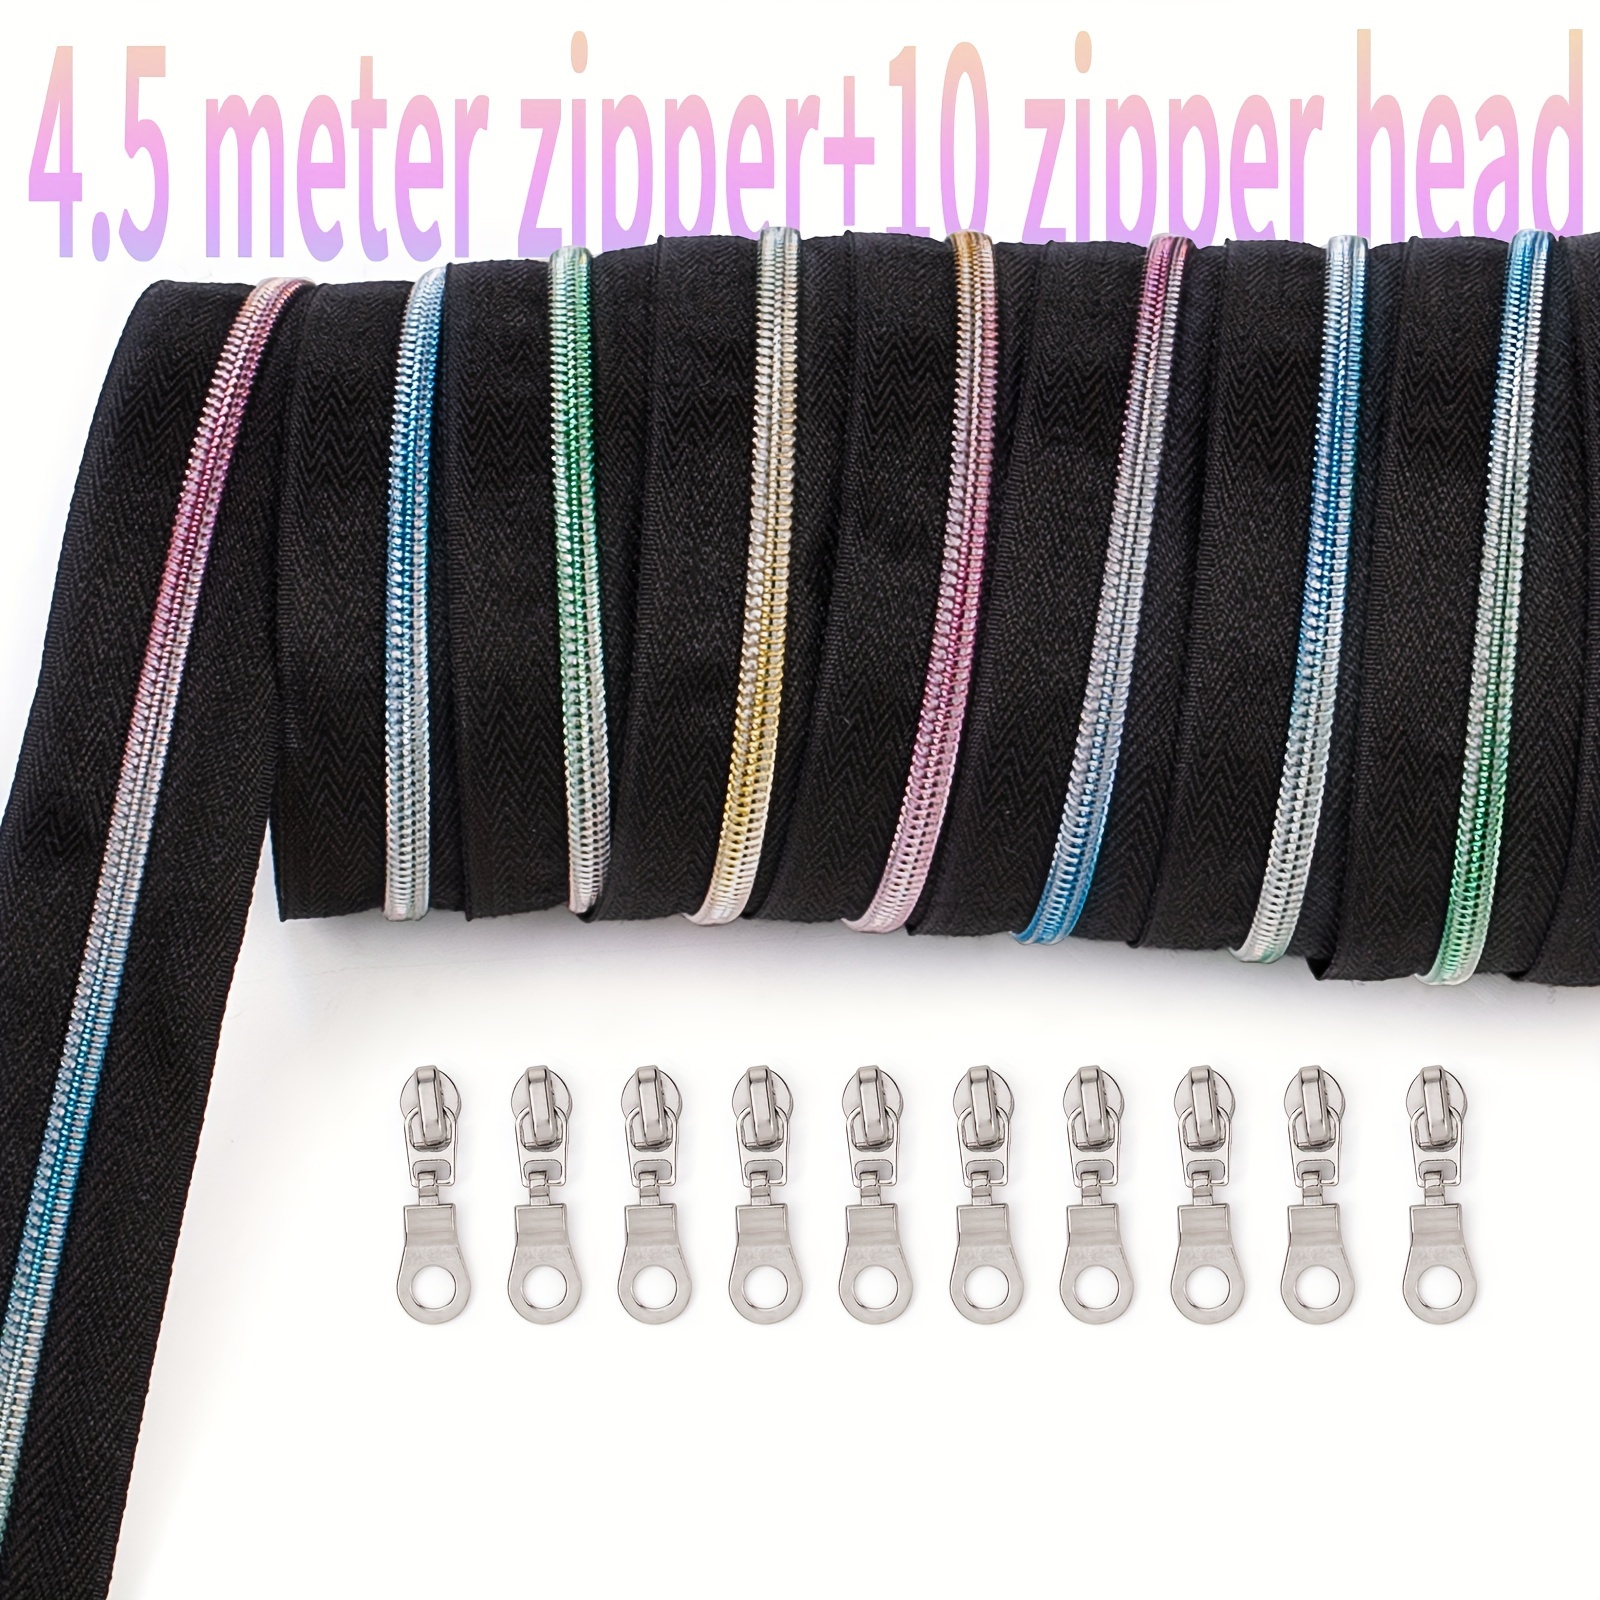 

1 Set 4.5m Zipper+10 Pulls, No. 3 Nylon Colorful Teeth Zipper, Colorful Gradient Teeth, Extra Long Free Cutting, Suitable For Clothing Pockets, Bags Handbags, Handmade Diy And More